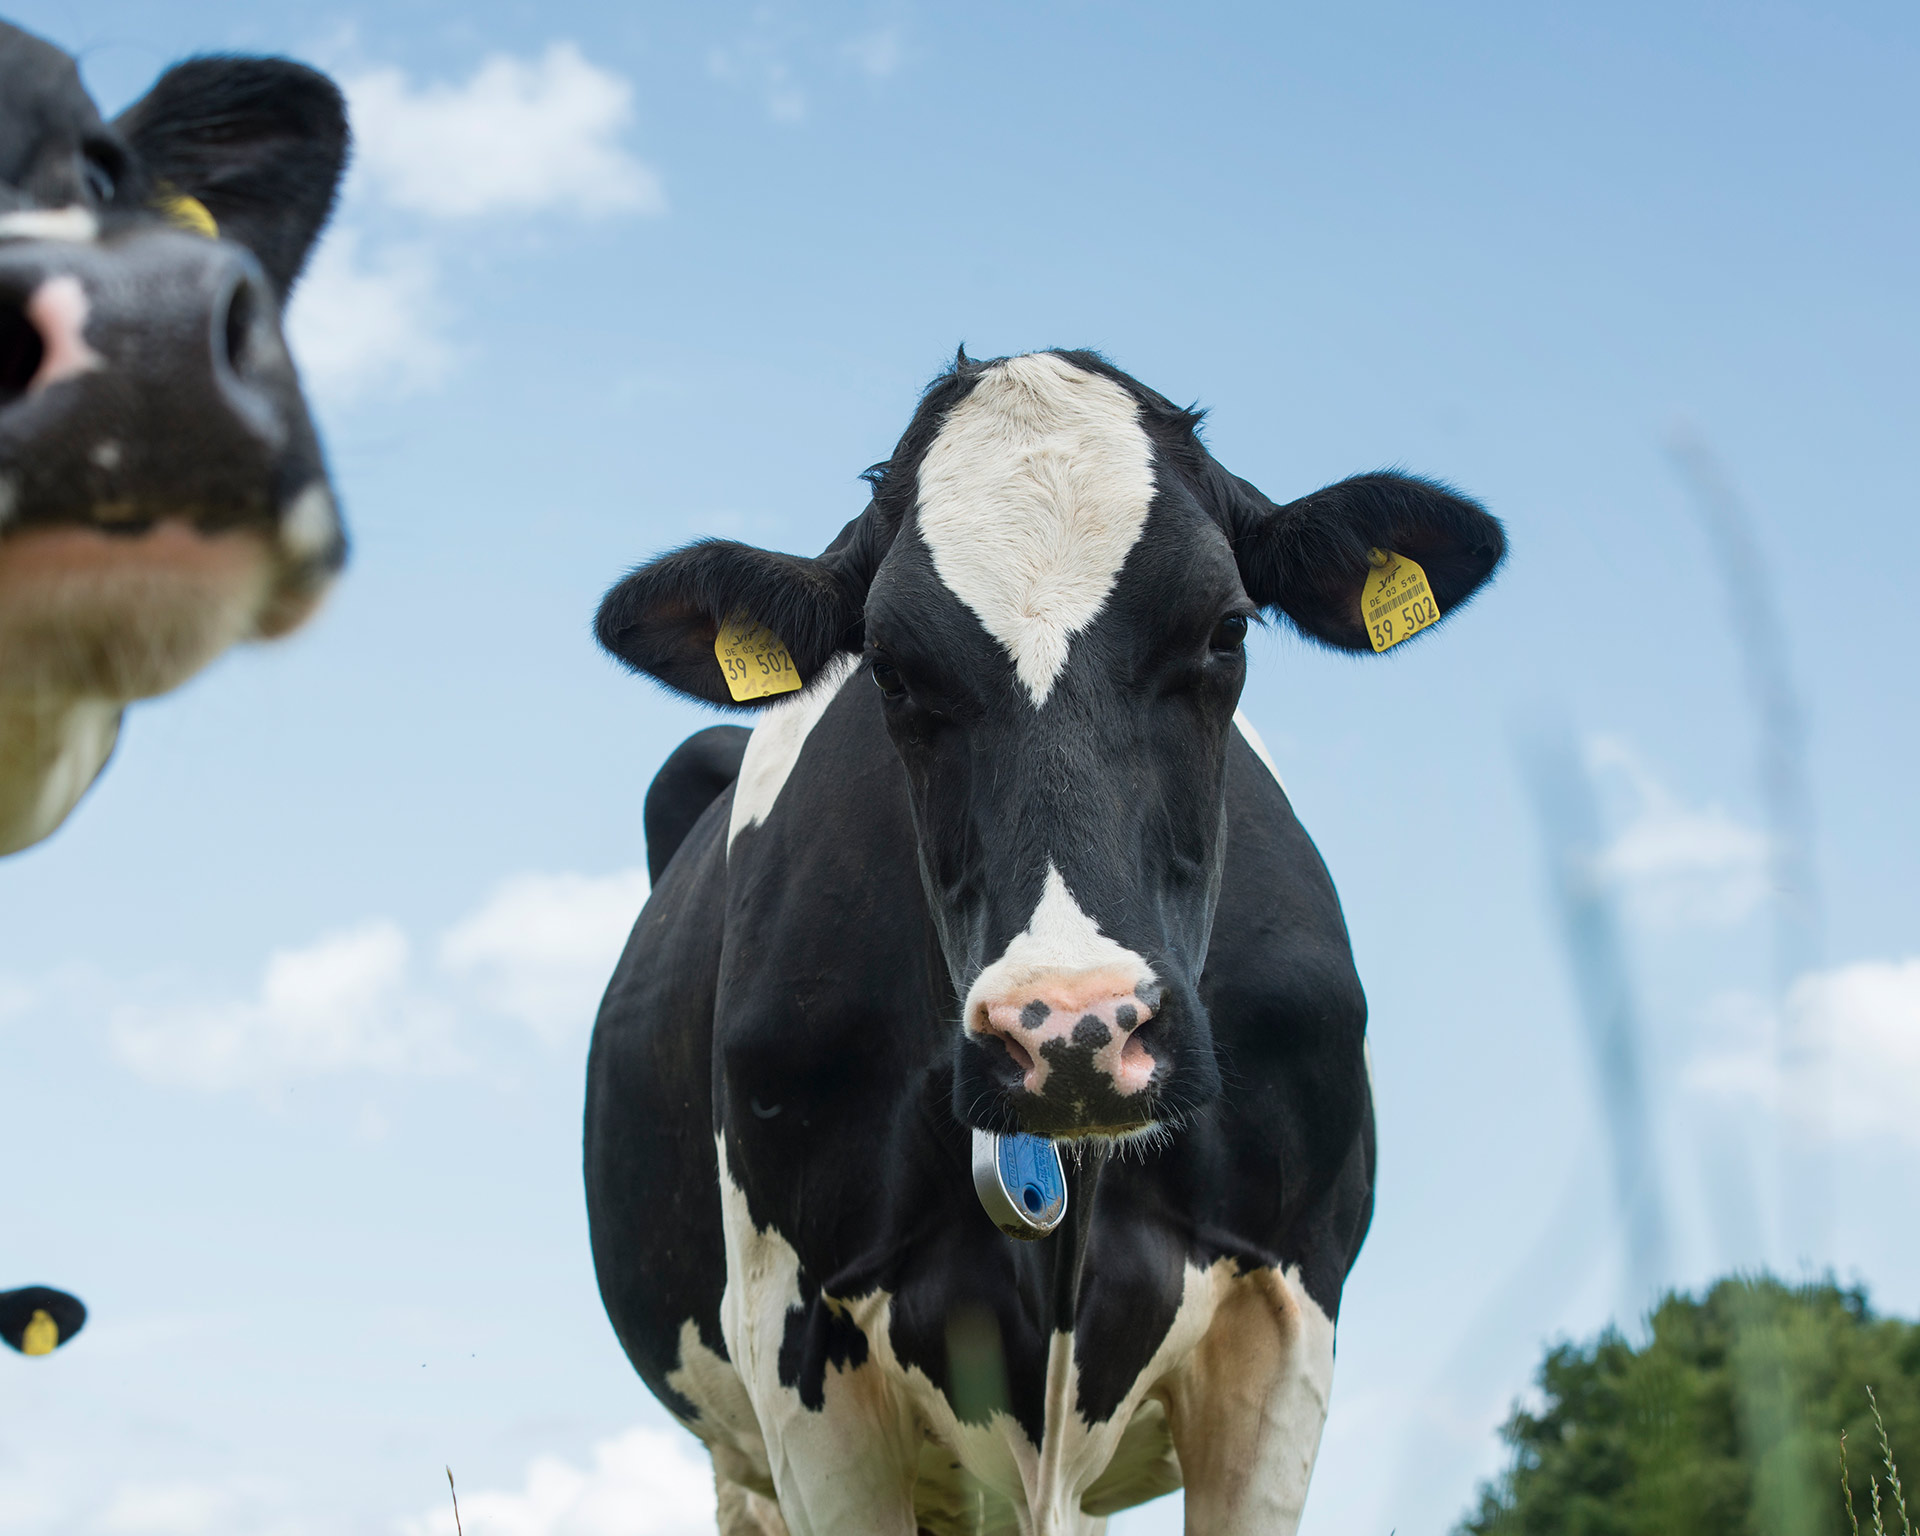 What do you need to know about the immune system of a cow?